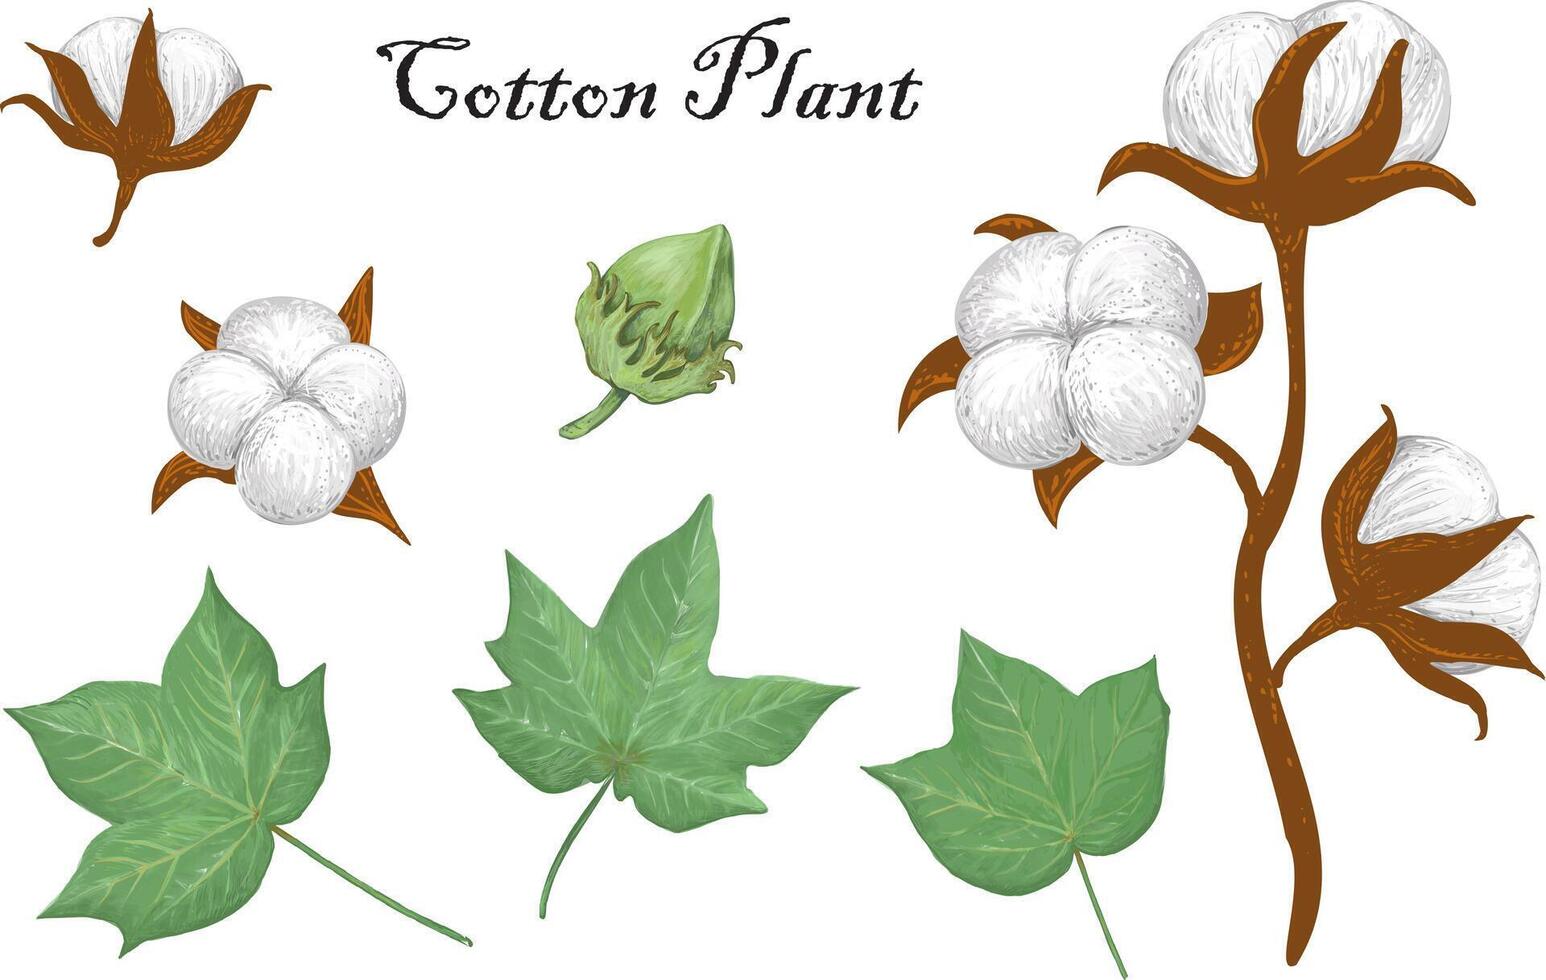 Delicate realistic hand drawn vector illustration of organic cotton plant elements - stem, leaves, bud and bolls. Gossypium botanical illustration in vintage style.